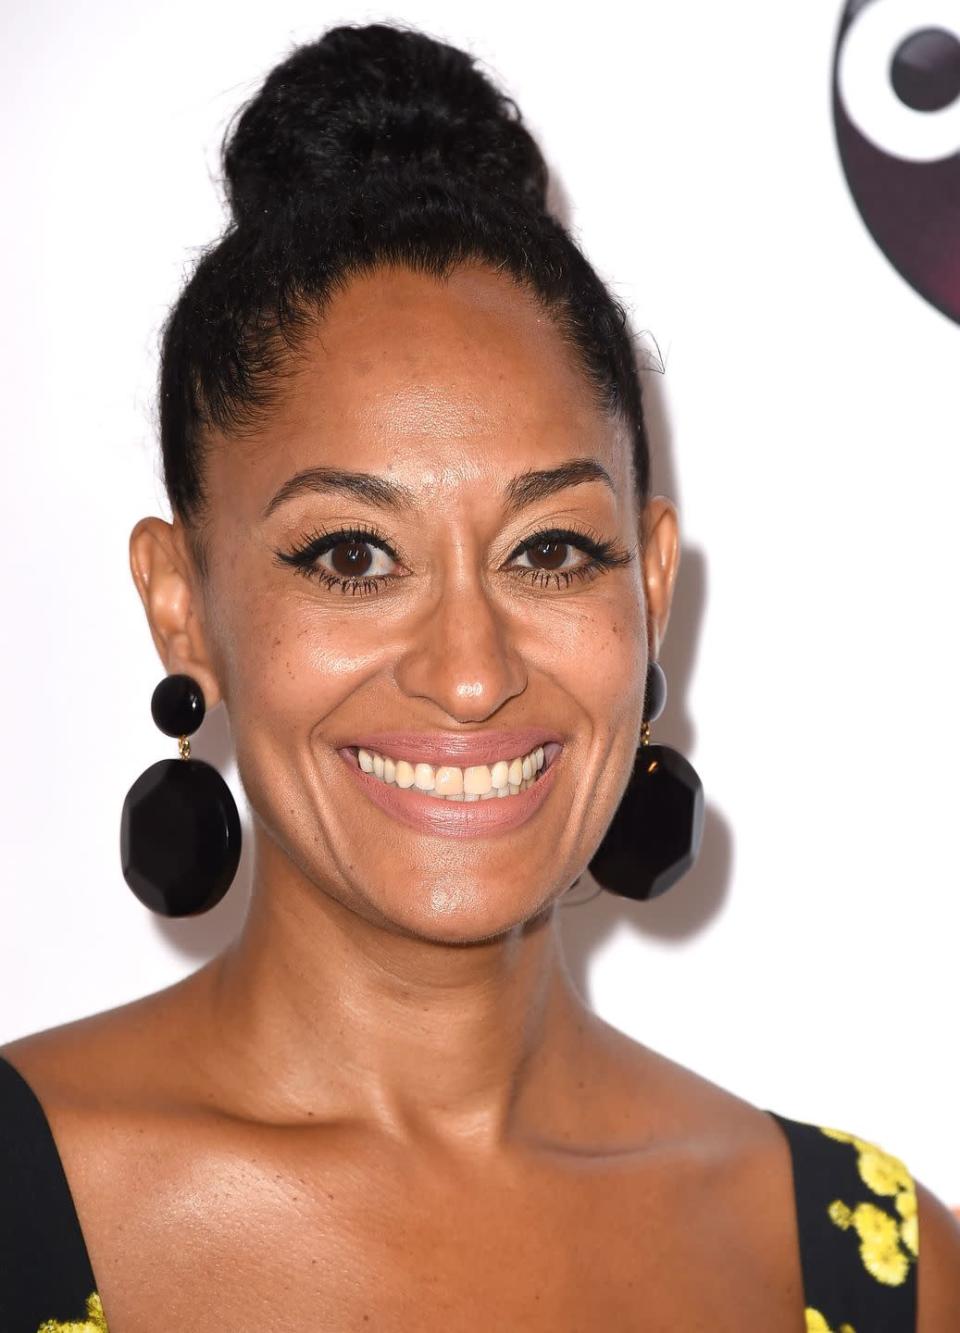 <p>A bun at the crown of your head like <strong>Tracee Ellis Ross</strong> is one of the best ways to look effortlessly chic in seconds. Smooth the top and sides with a hairspray. </p><p><a class="link " href="https://go.redirectingat.com?id=74968X1596630&url=https%3A%2F%2Fwww.ulta.com%2Fcompressed-micro-mist-curl-level-2-hair-spray&sref=https%3A%2F%2Fwww.goodhousekeeping.com%2Fbeauty%2Fhair%2Fg3536%2Fnatural-hairstyles%2F" rel="nofollow noopener" target="_blank" data-ylk="slk:SHOP HAIRSPRAY">SHOP HAIRSPRAY</a></p>